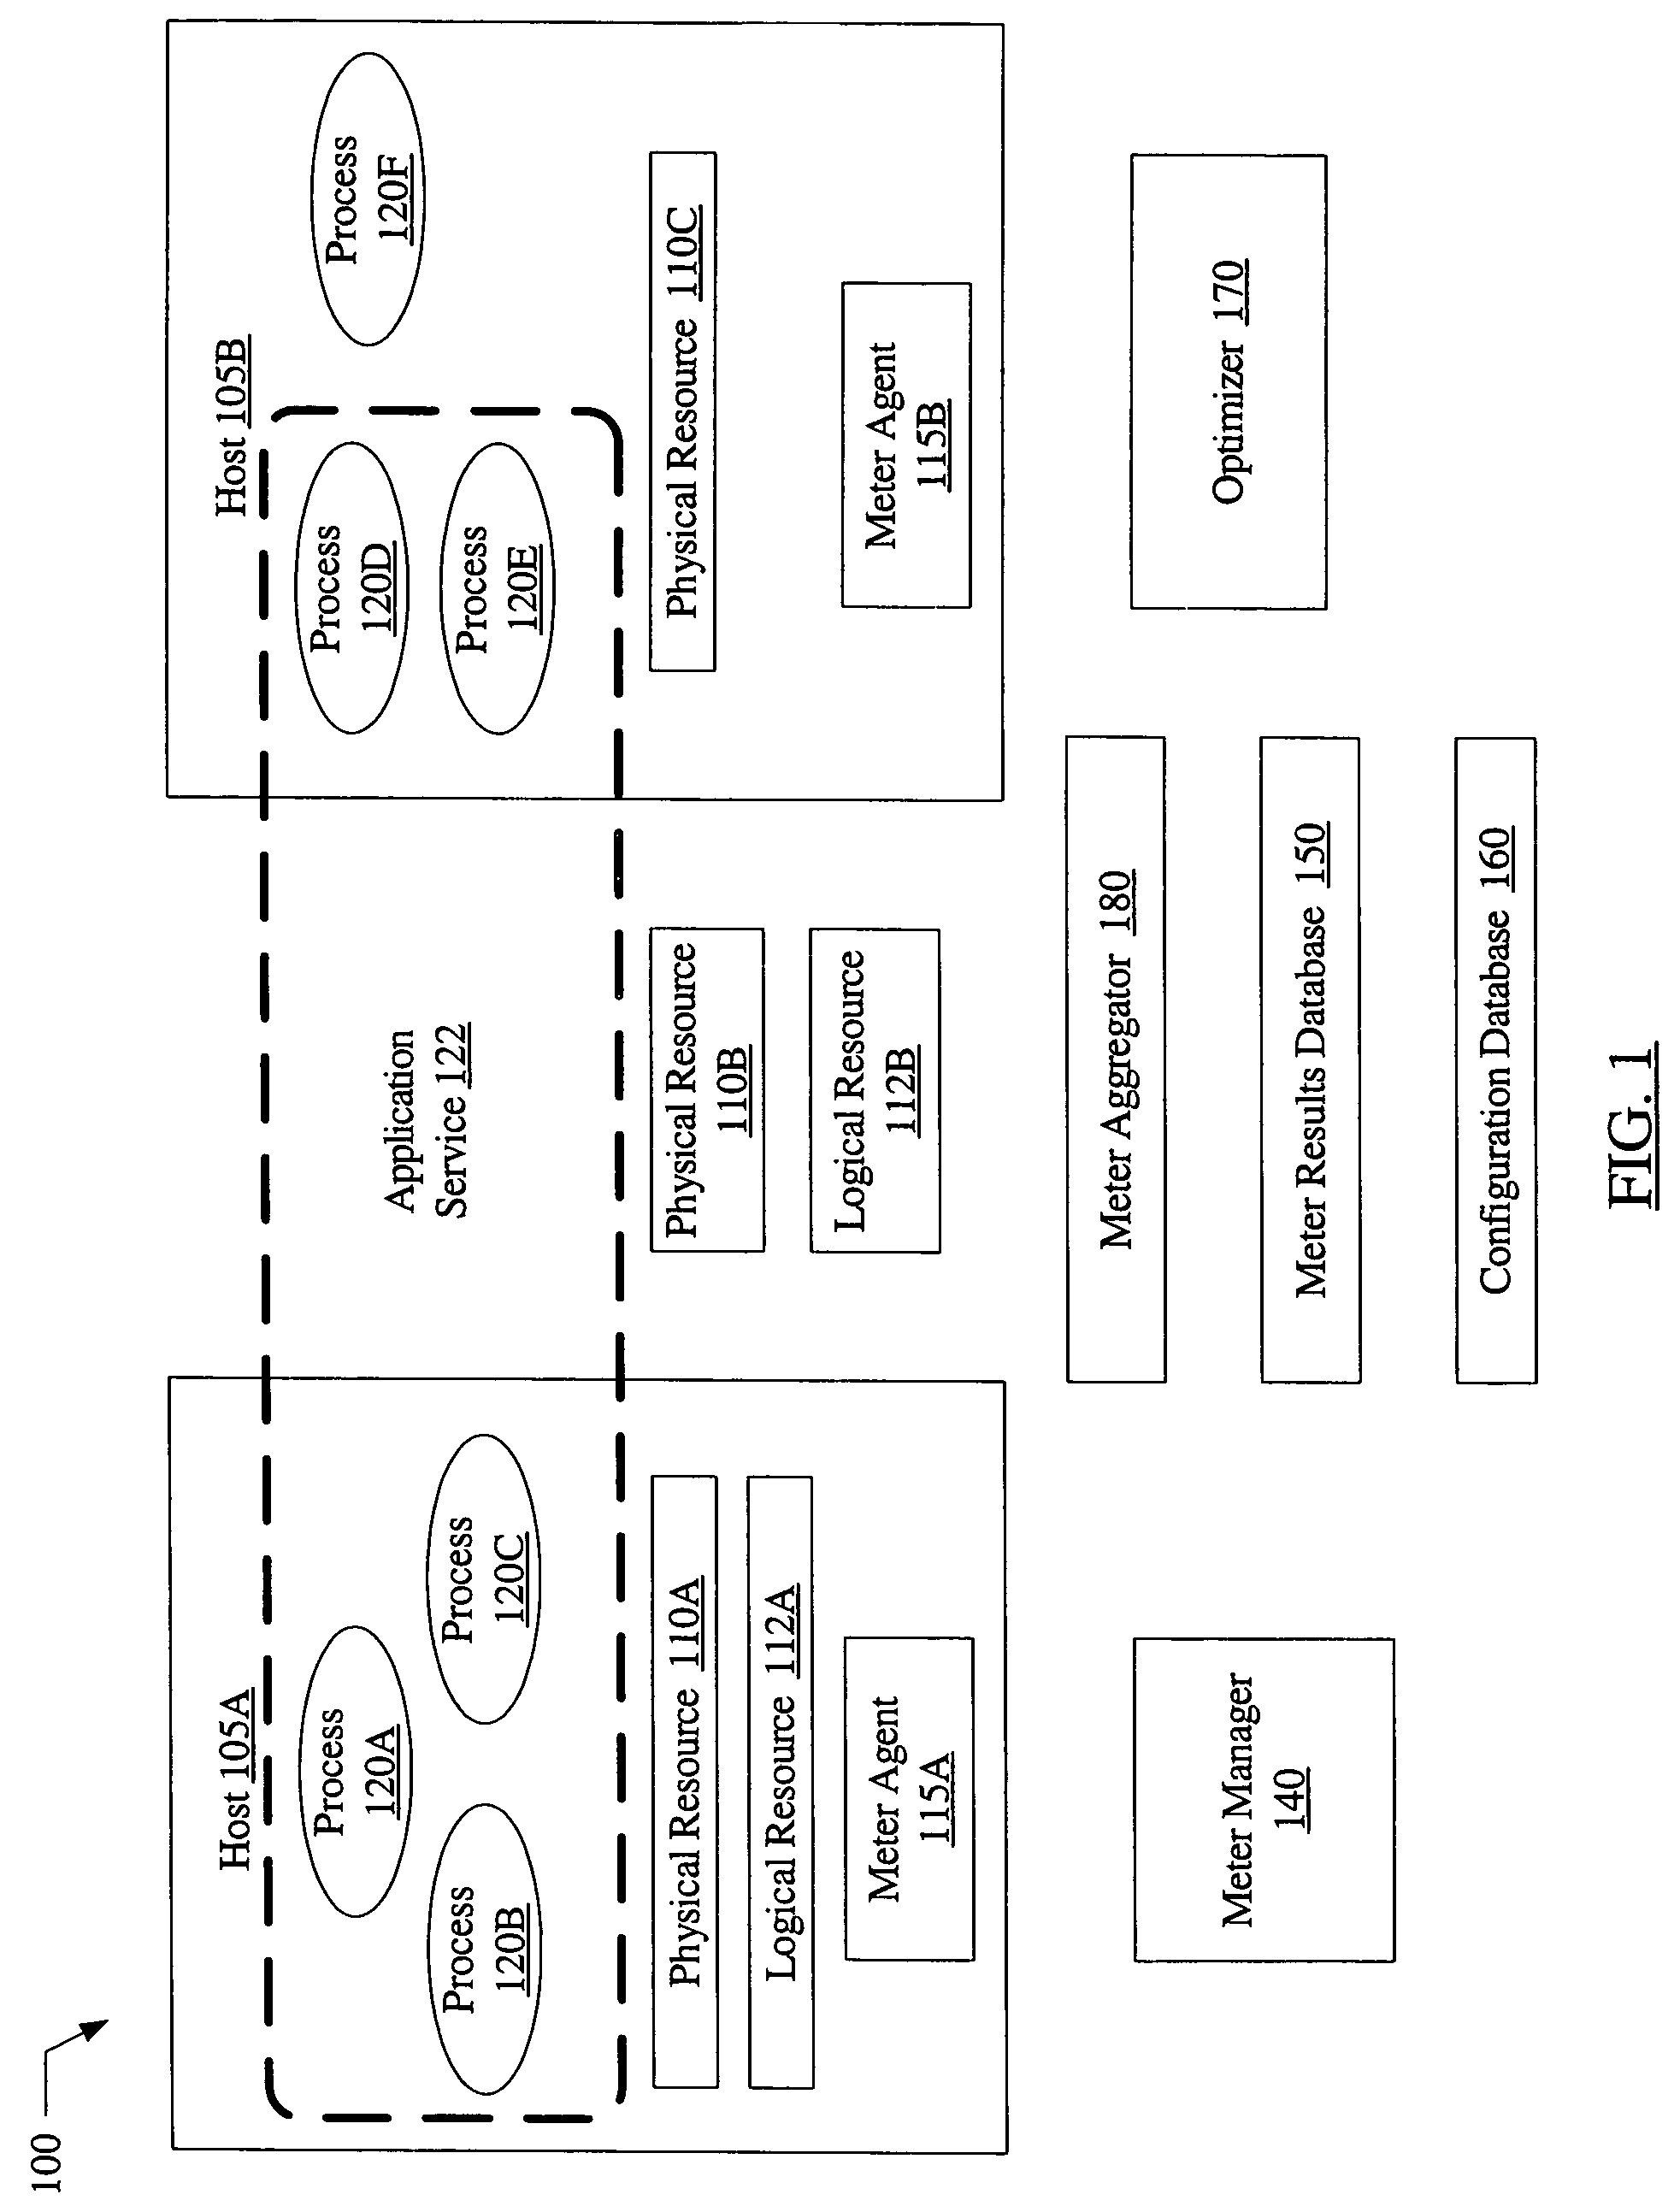 System and method for metering of application services in utility computing environments